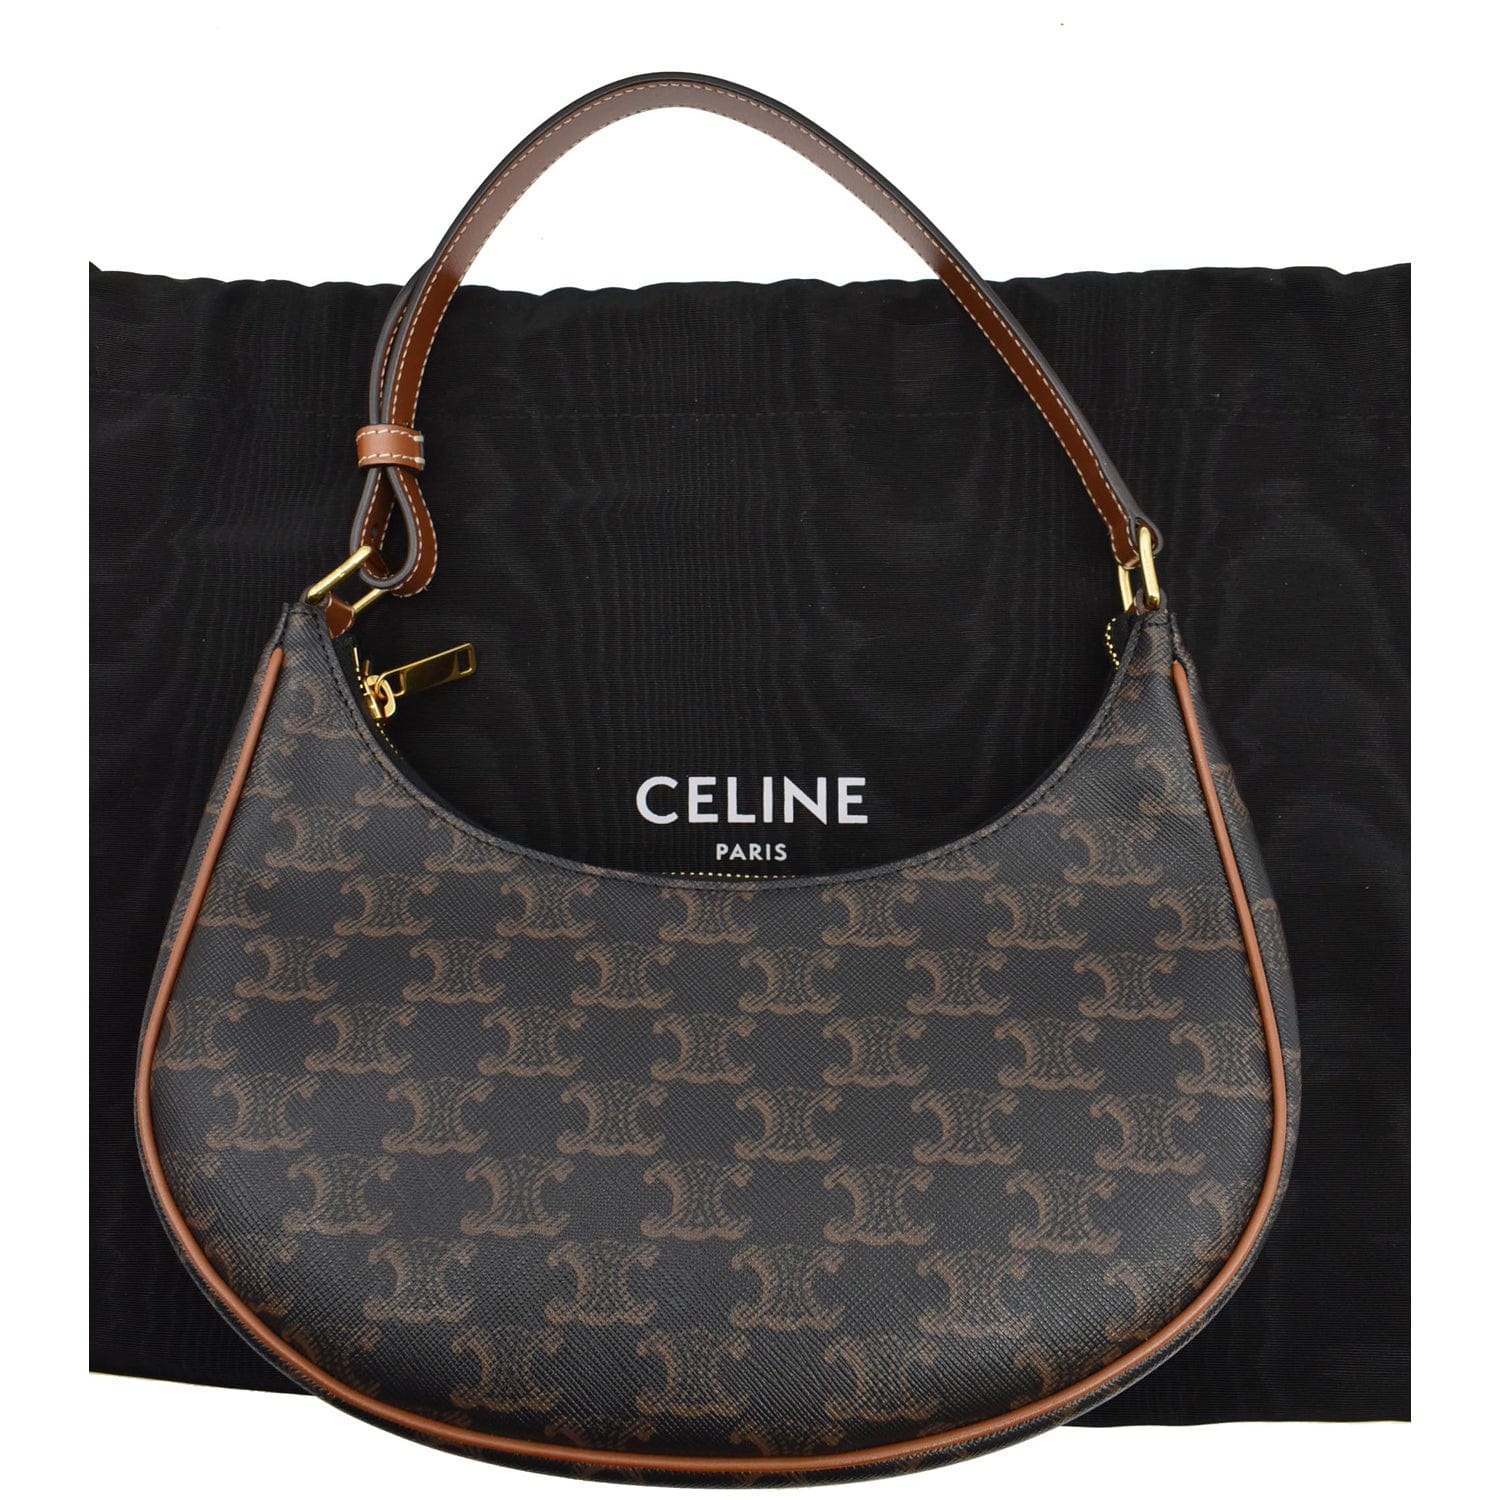 CELINE Triomphe Medium Travel Bag in Triomphe Canvas and calfskin